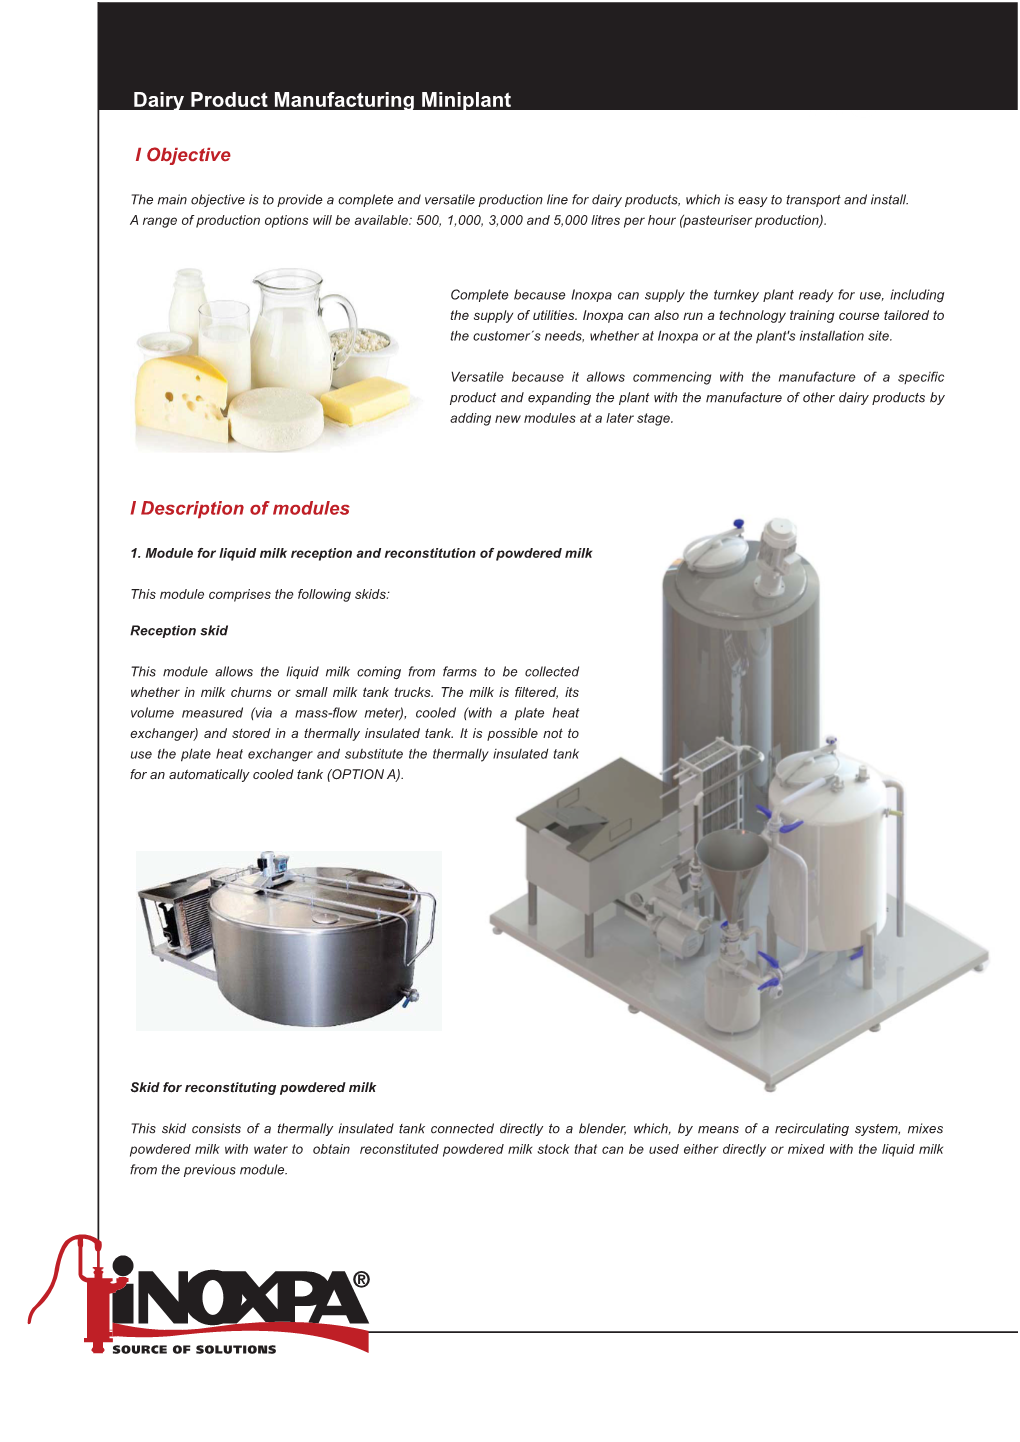 Dairy Product Manufacturing Miniplant MS